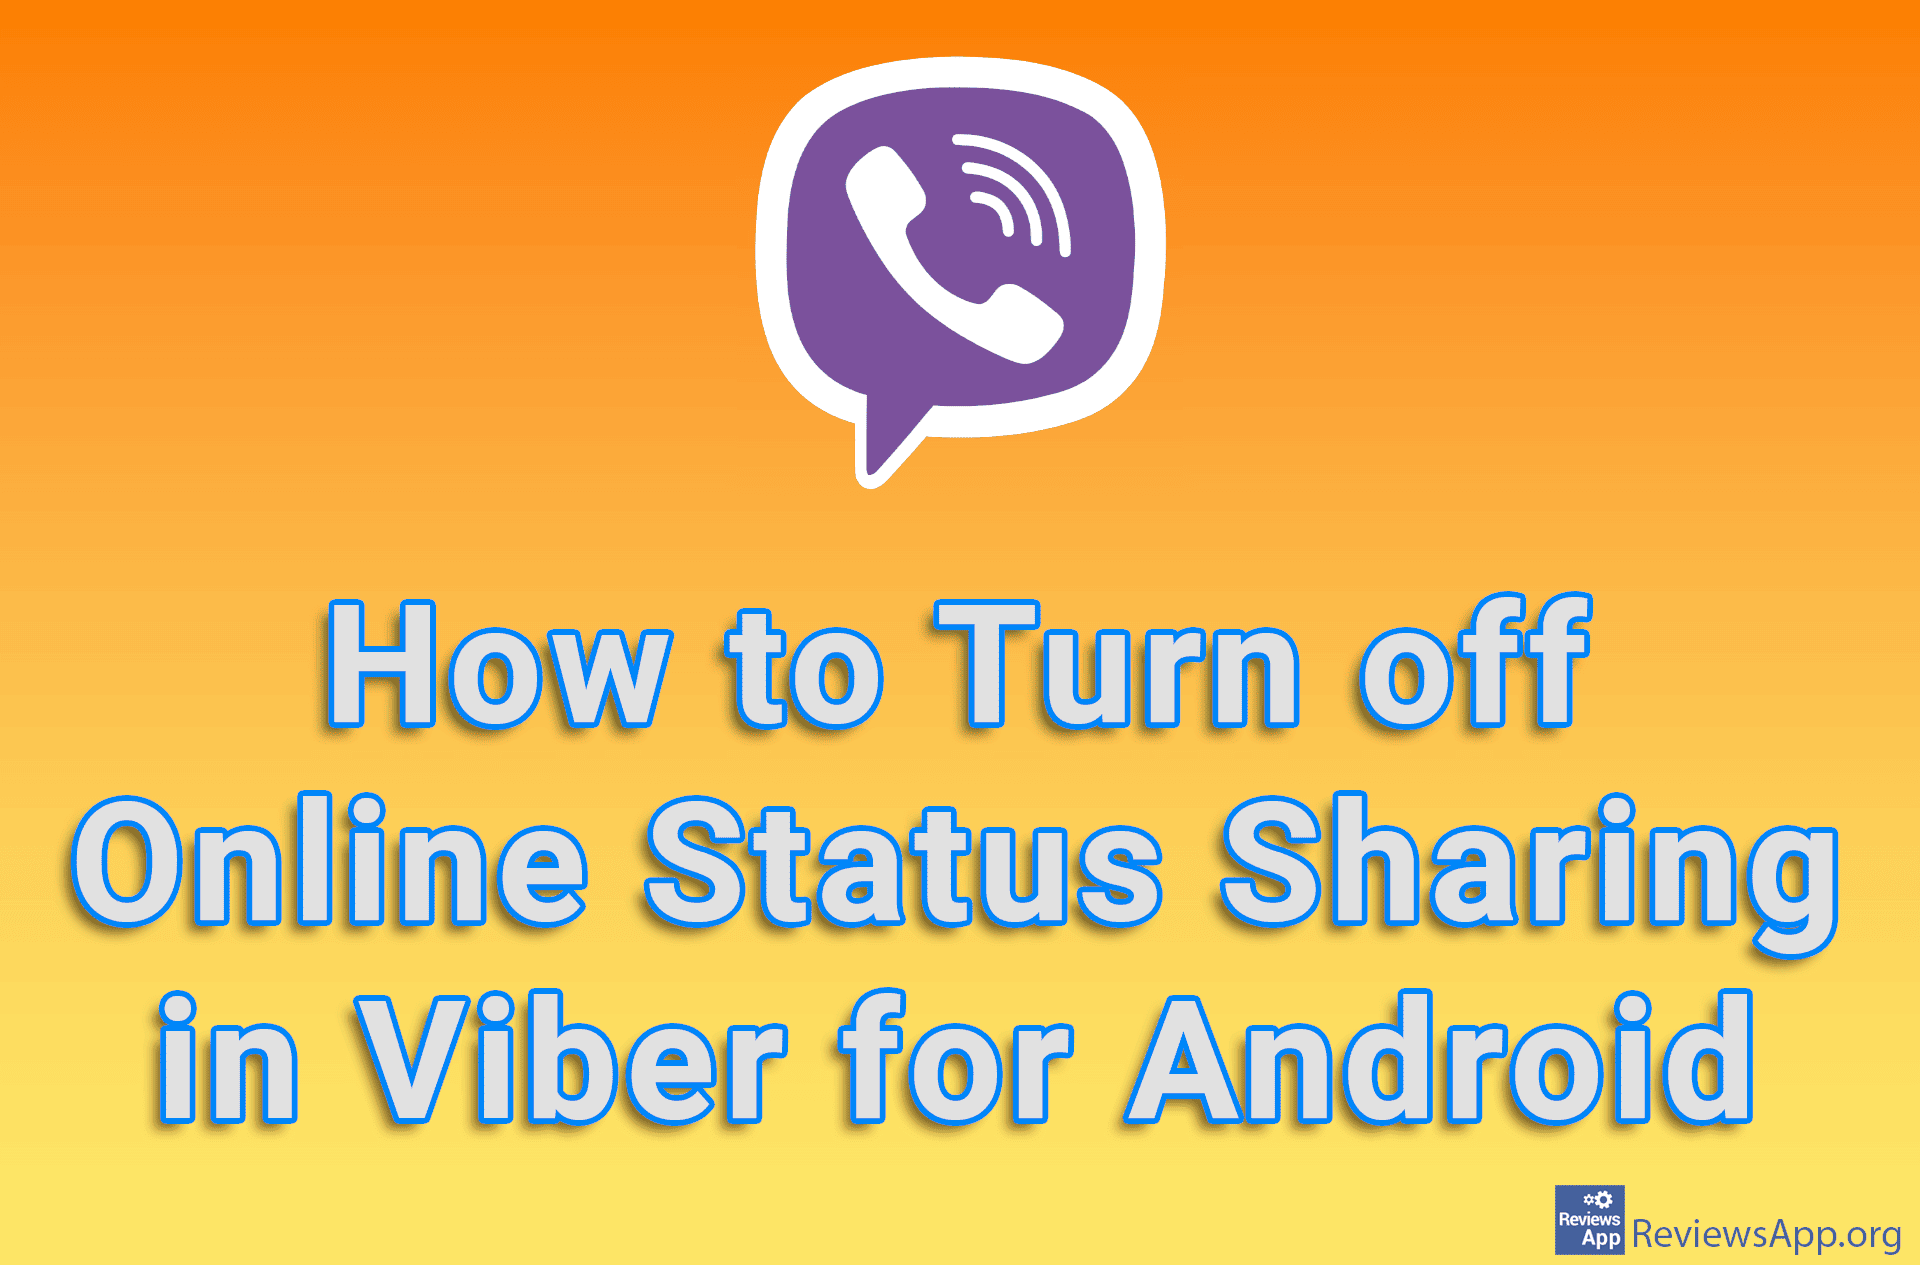 How to Turn off Online Status Sharing in Viber for Android